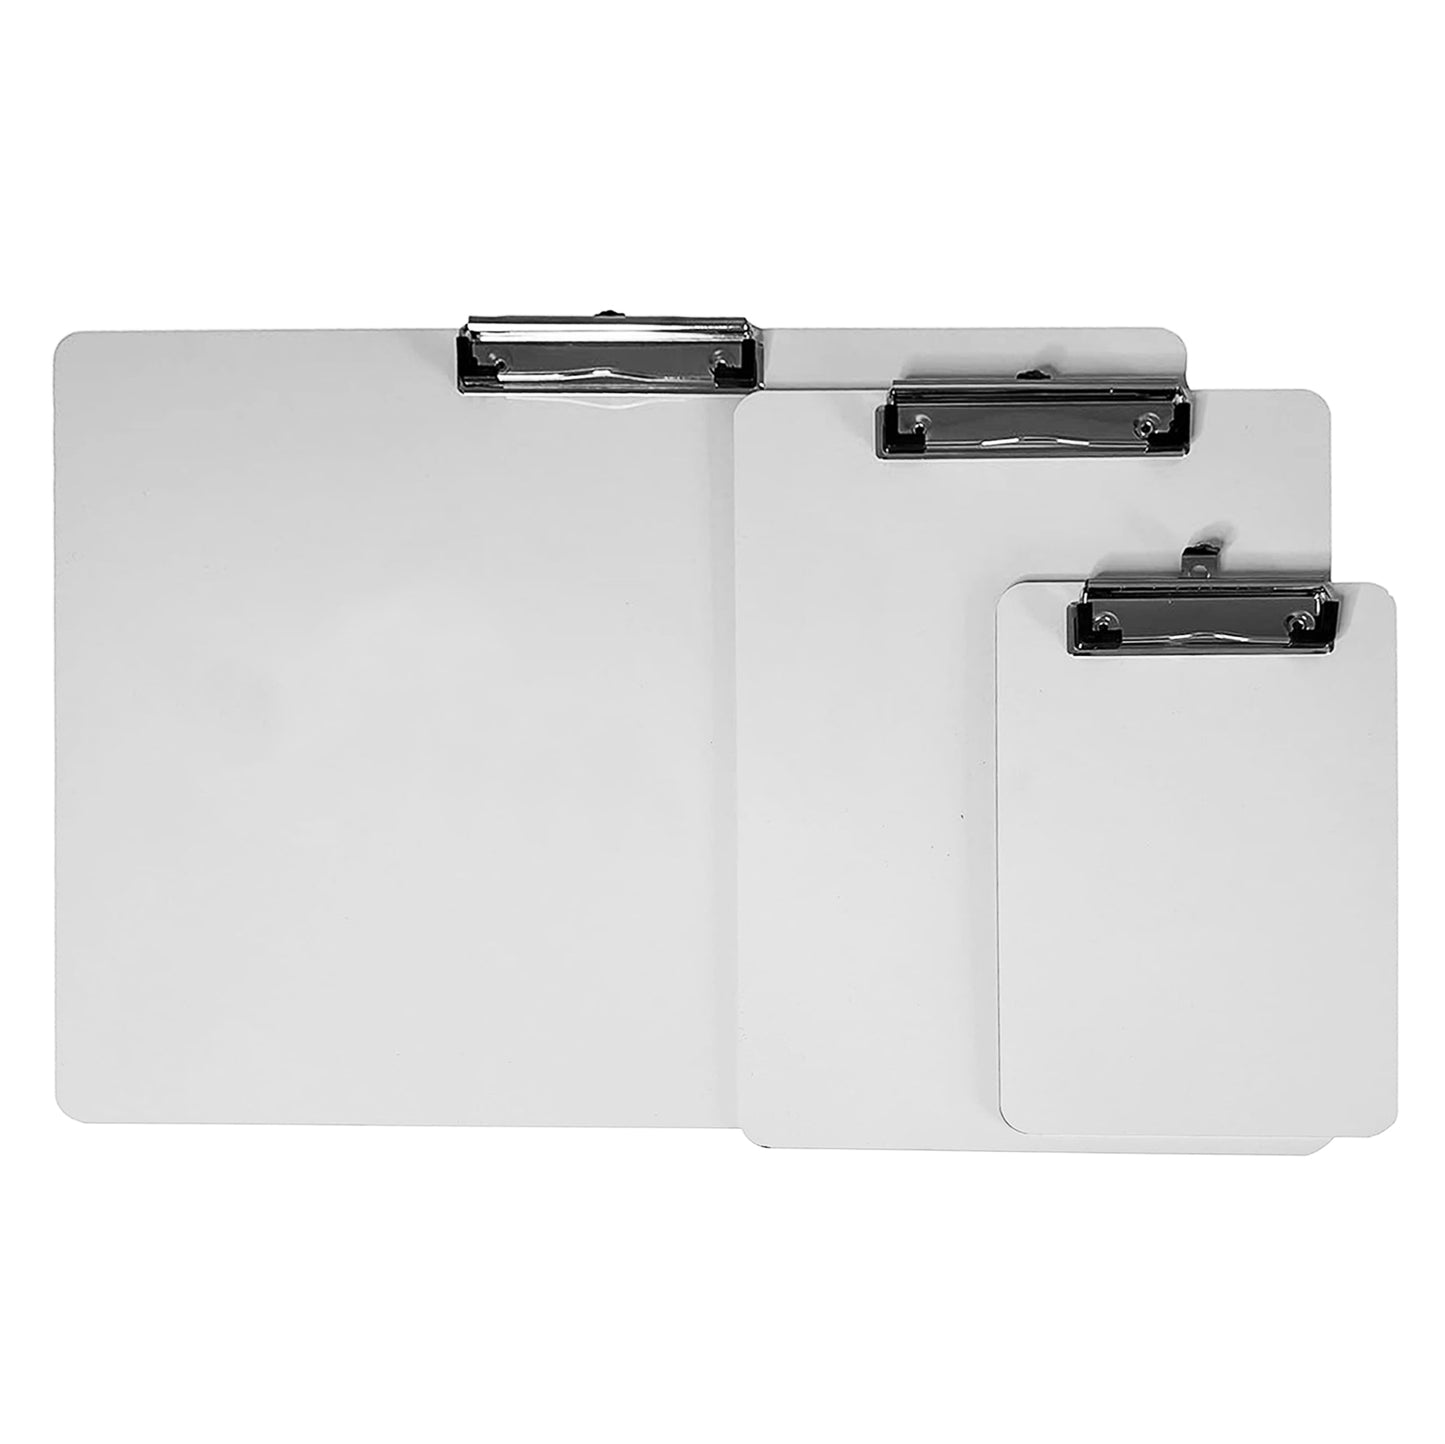 Pack of 12 Assorted Size Erasable Whiteboard Clipboards